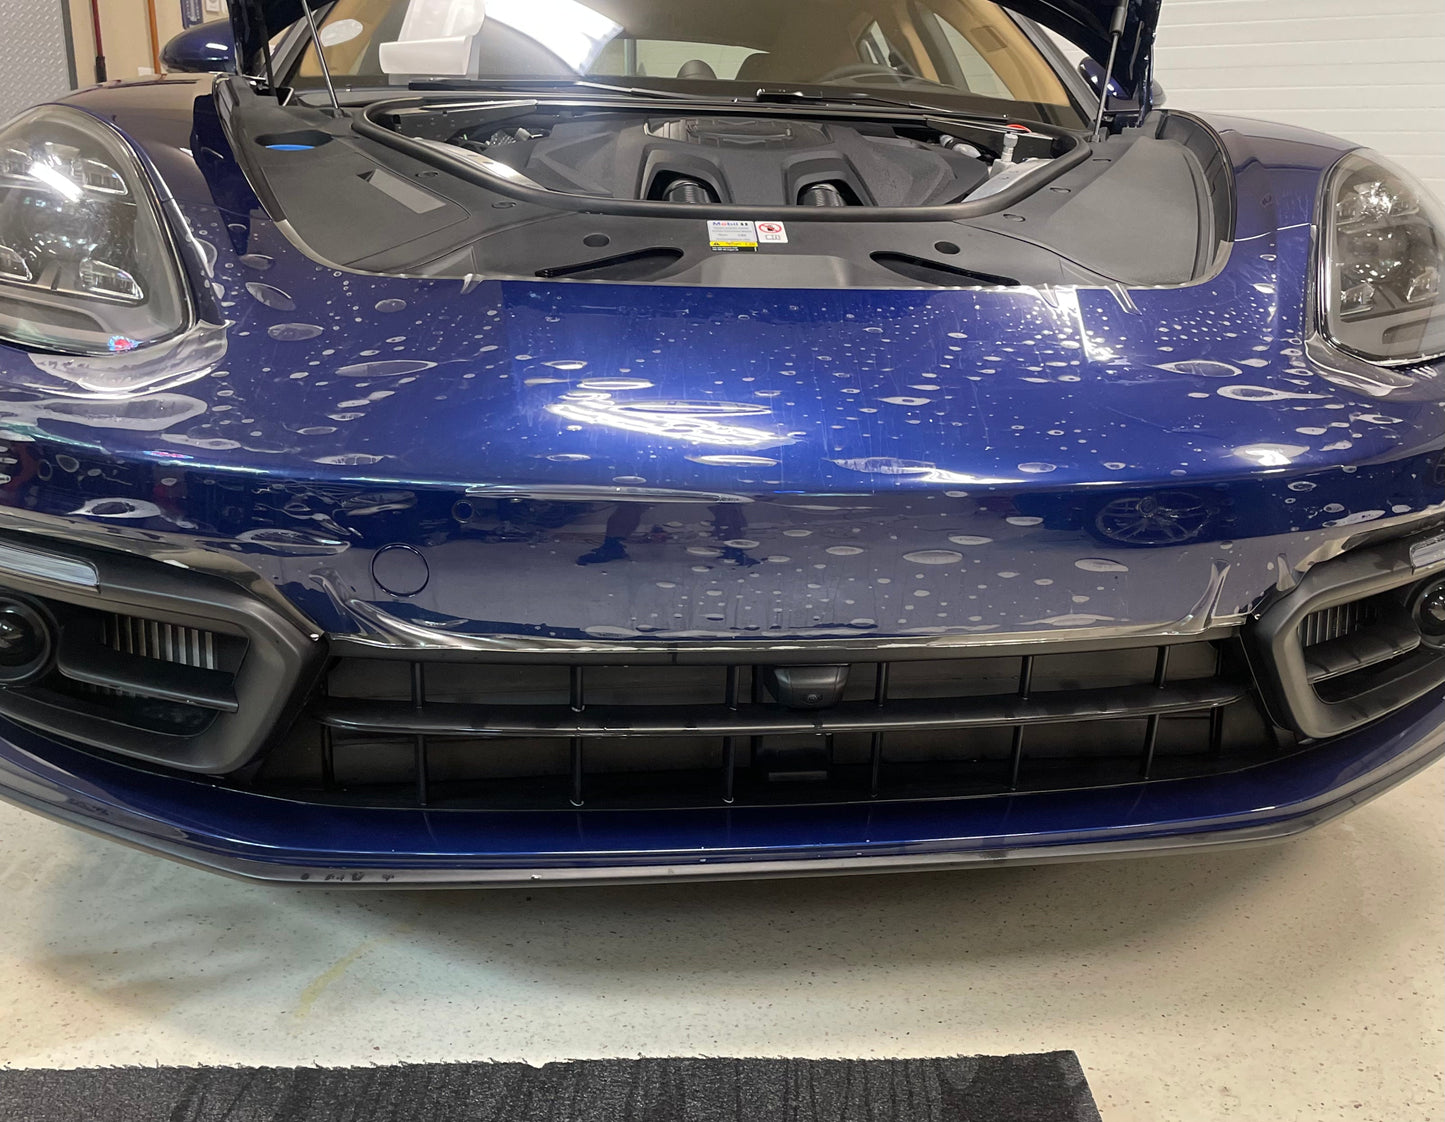 XPEL Paint Protection Film: FULL BODY